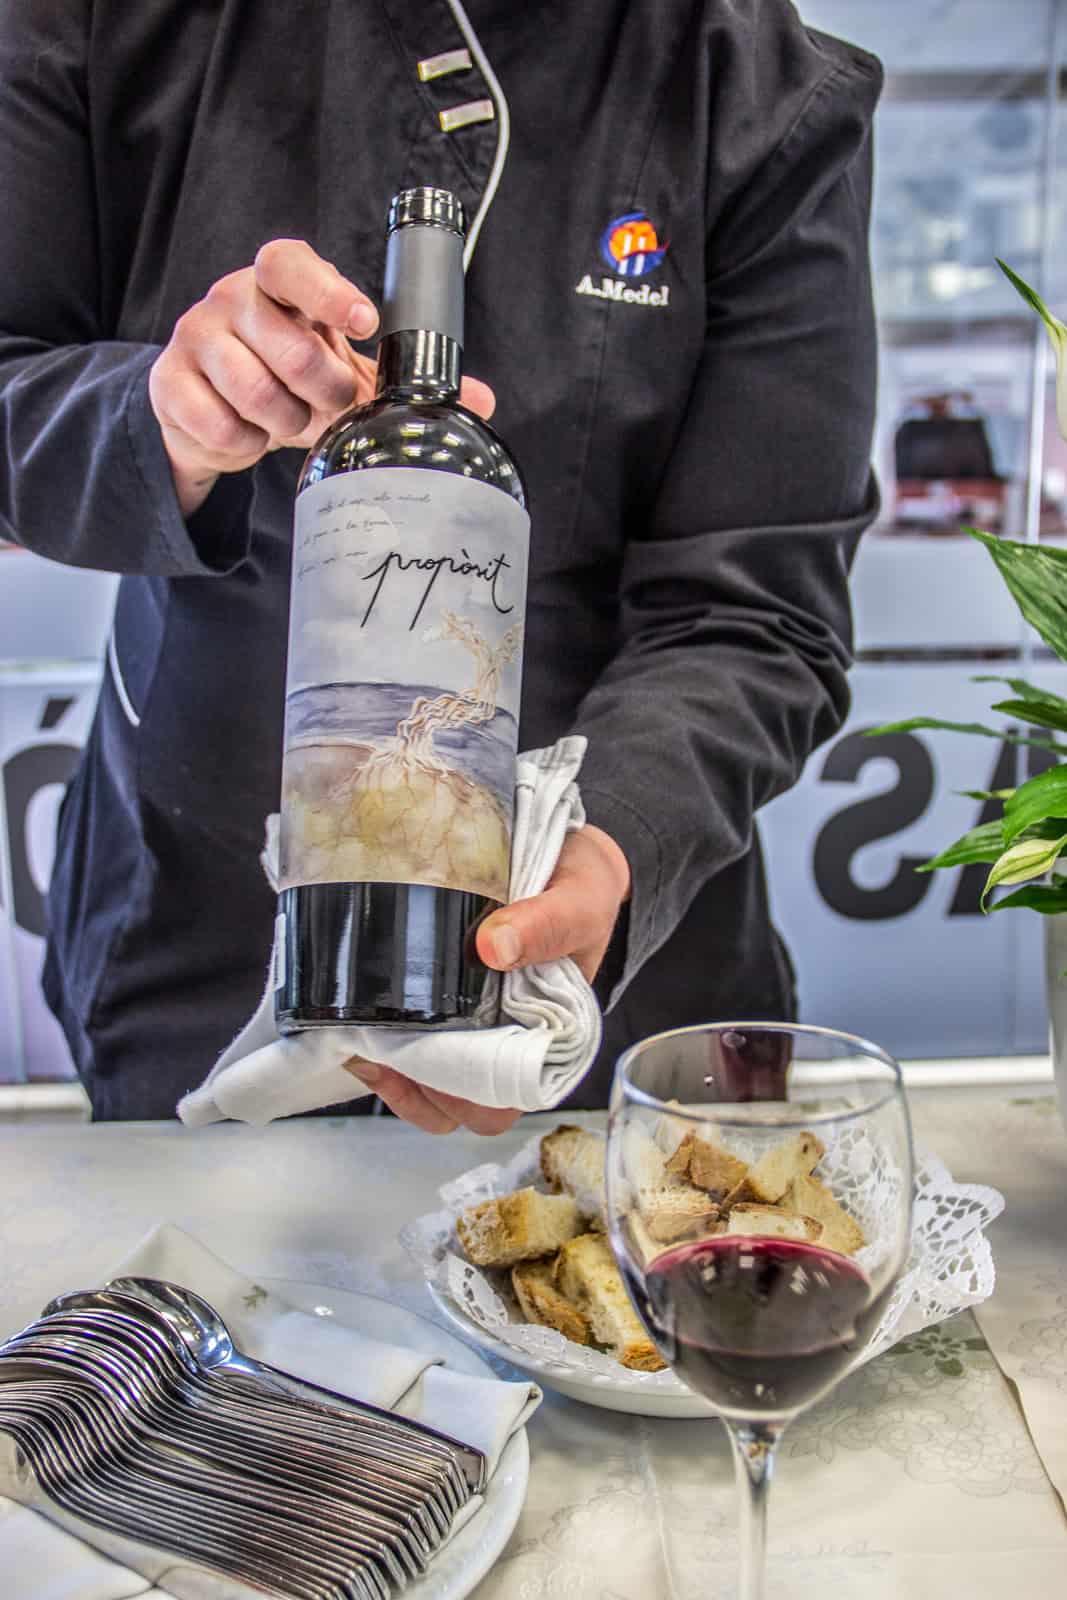 A waiter holds a bottle of wine; on the table is a glass of red wine and some a small pile of bite-size bread pieces. 